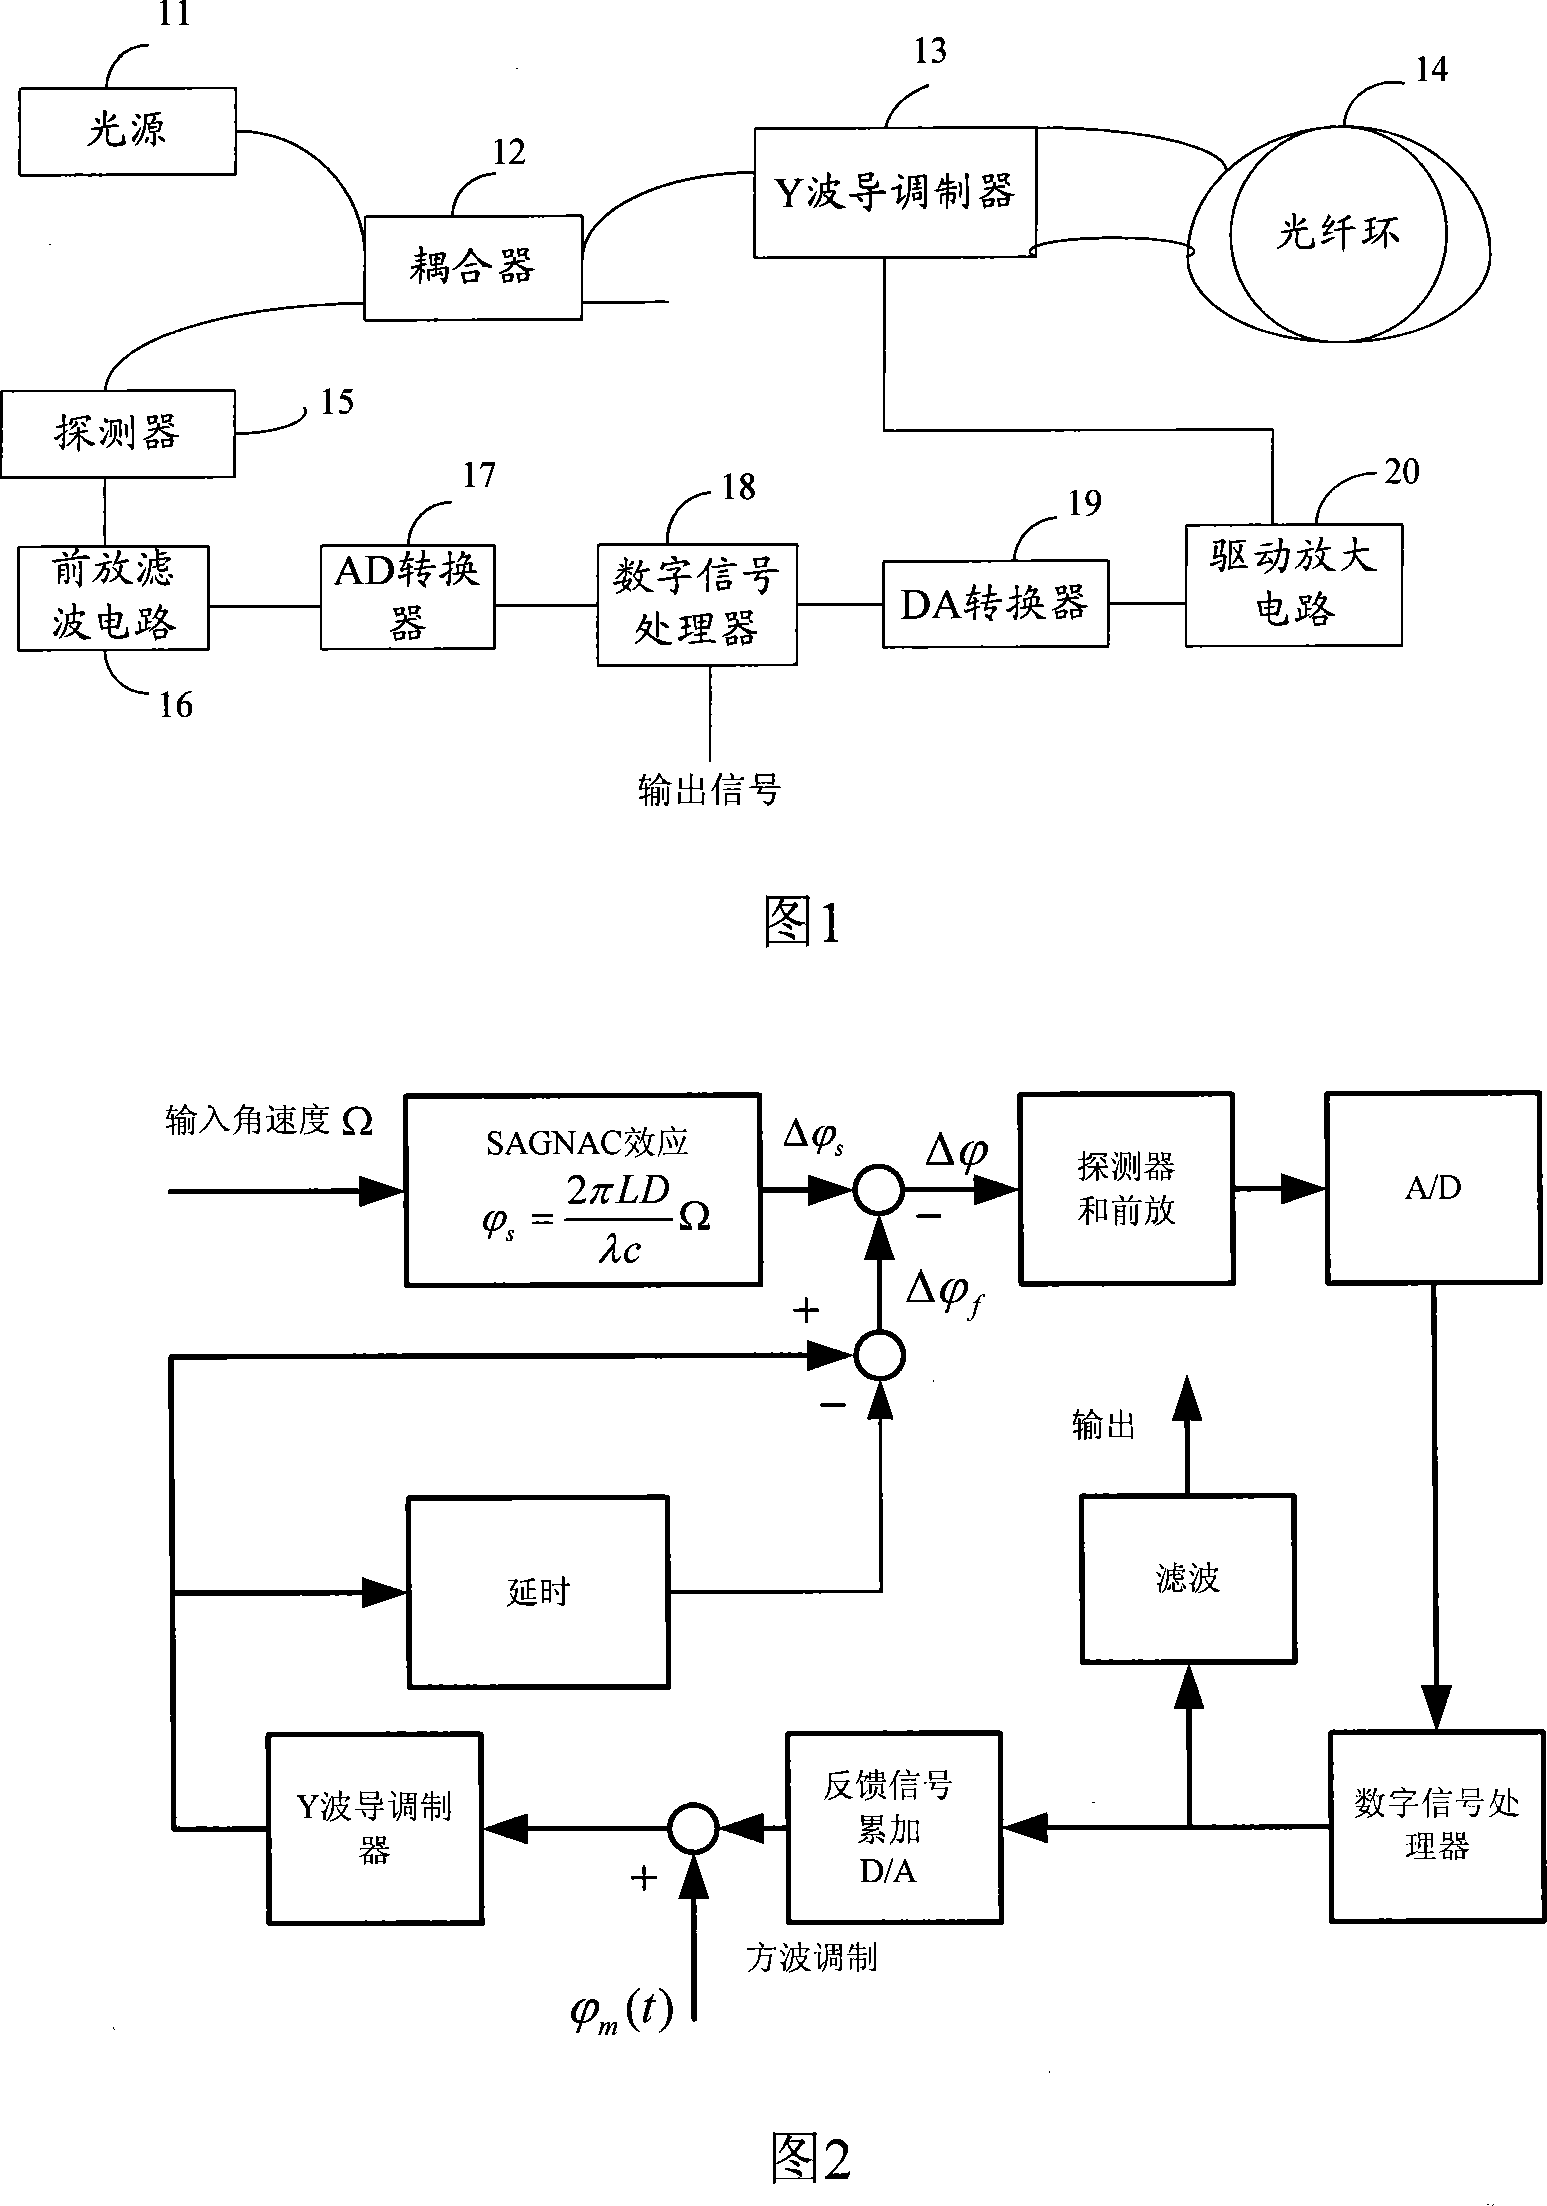 Closed-loop control method and apparatus of optical fibre gyro system